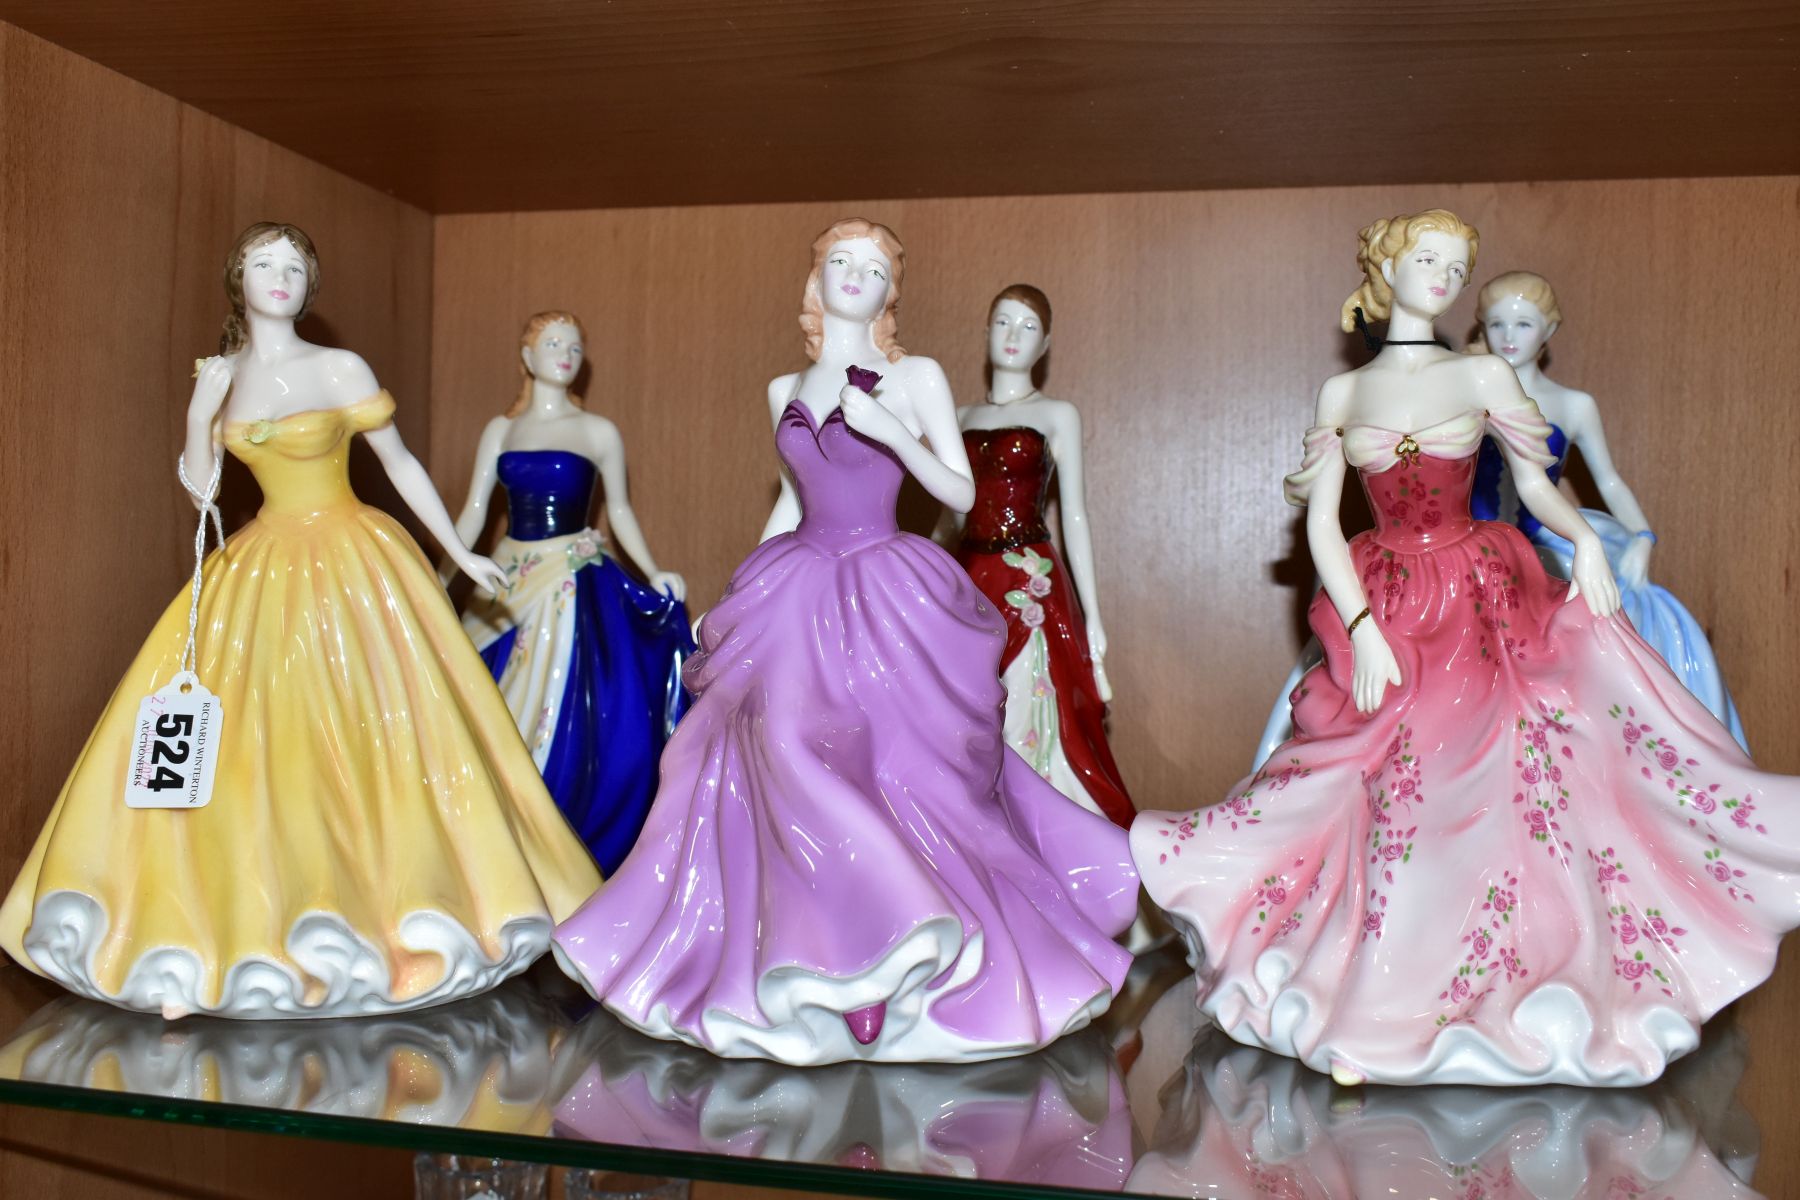 SIX BOXED ROYAL DOULTON FIGURE OF THE YEAR FIGURINES, comprising Classics Susan HN 4532 (2004) and